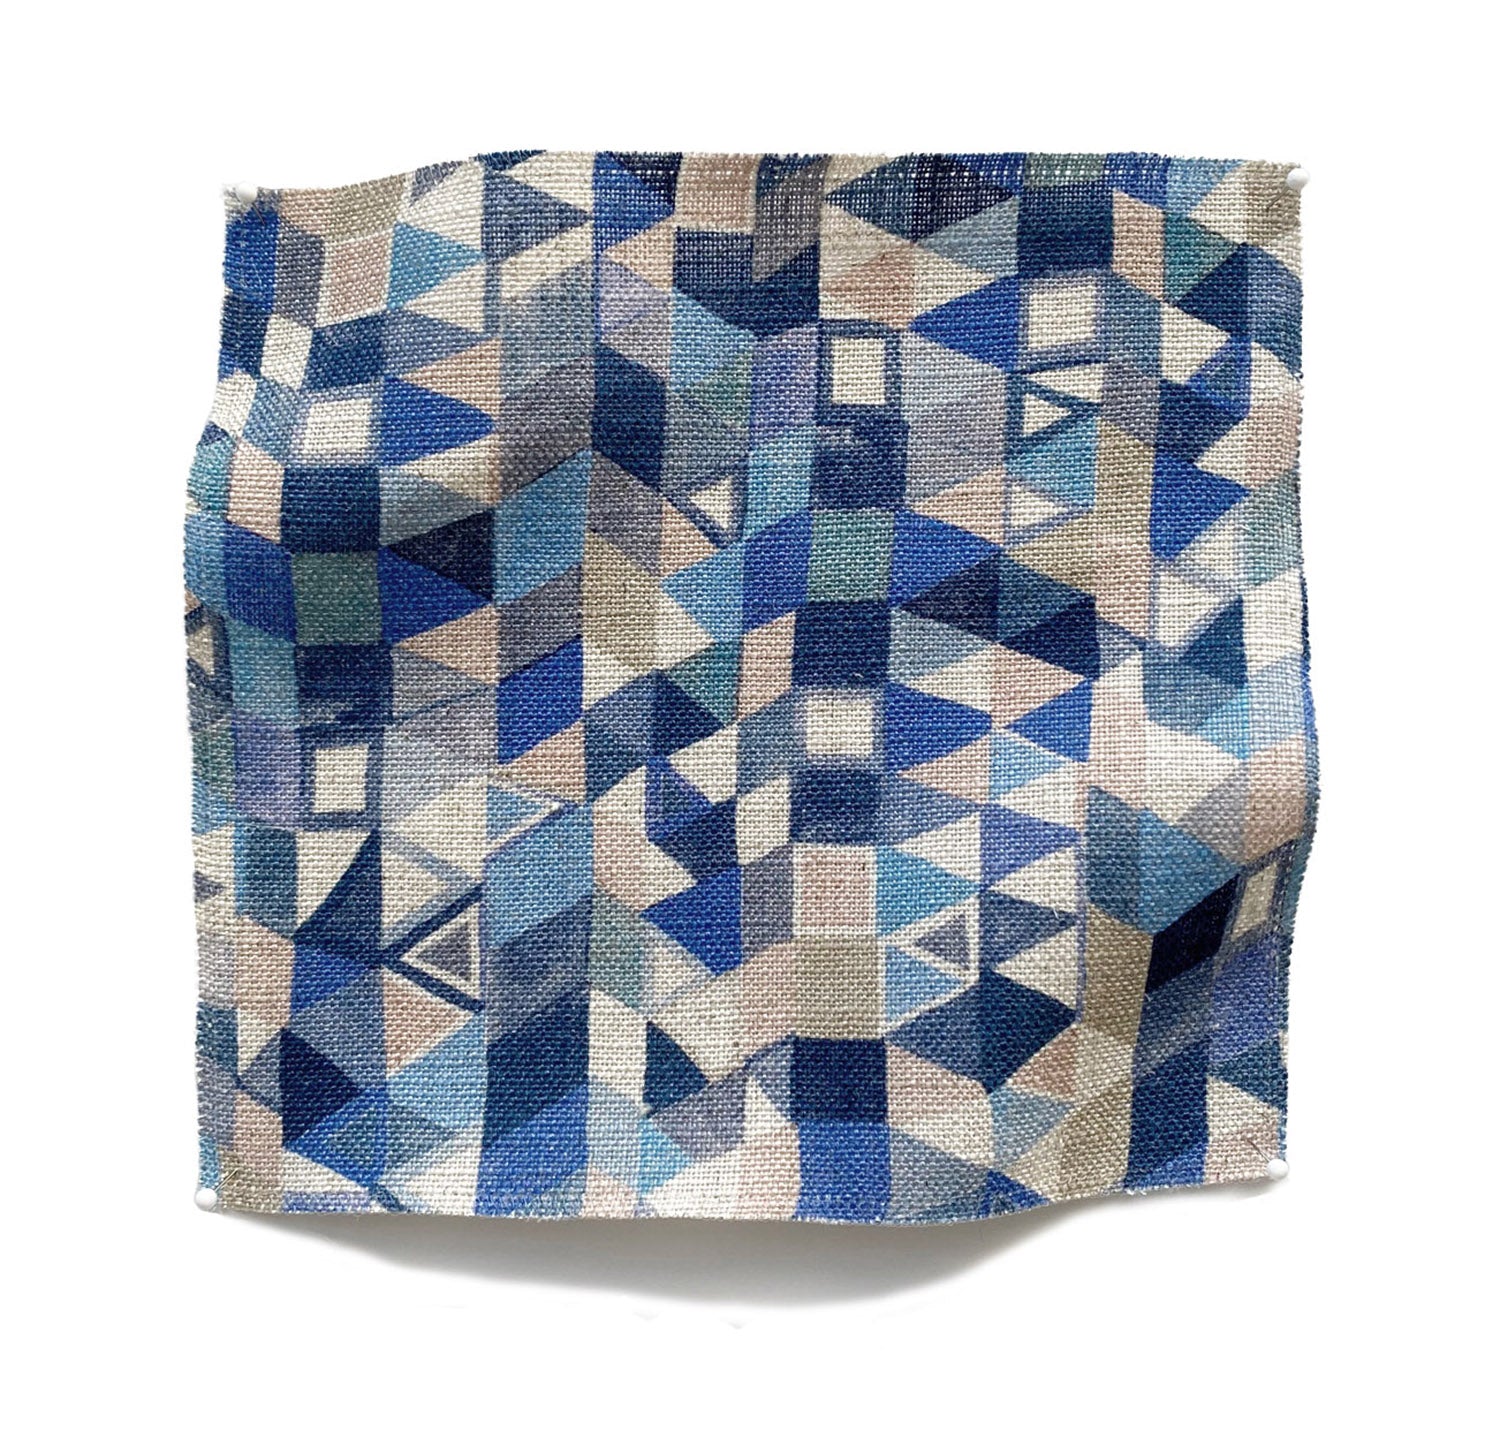 Square fabric swatch in a small-scale playful geometric print in shades of blue, tan and navy.